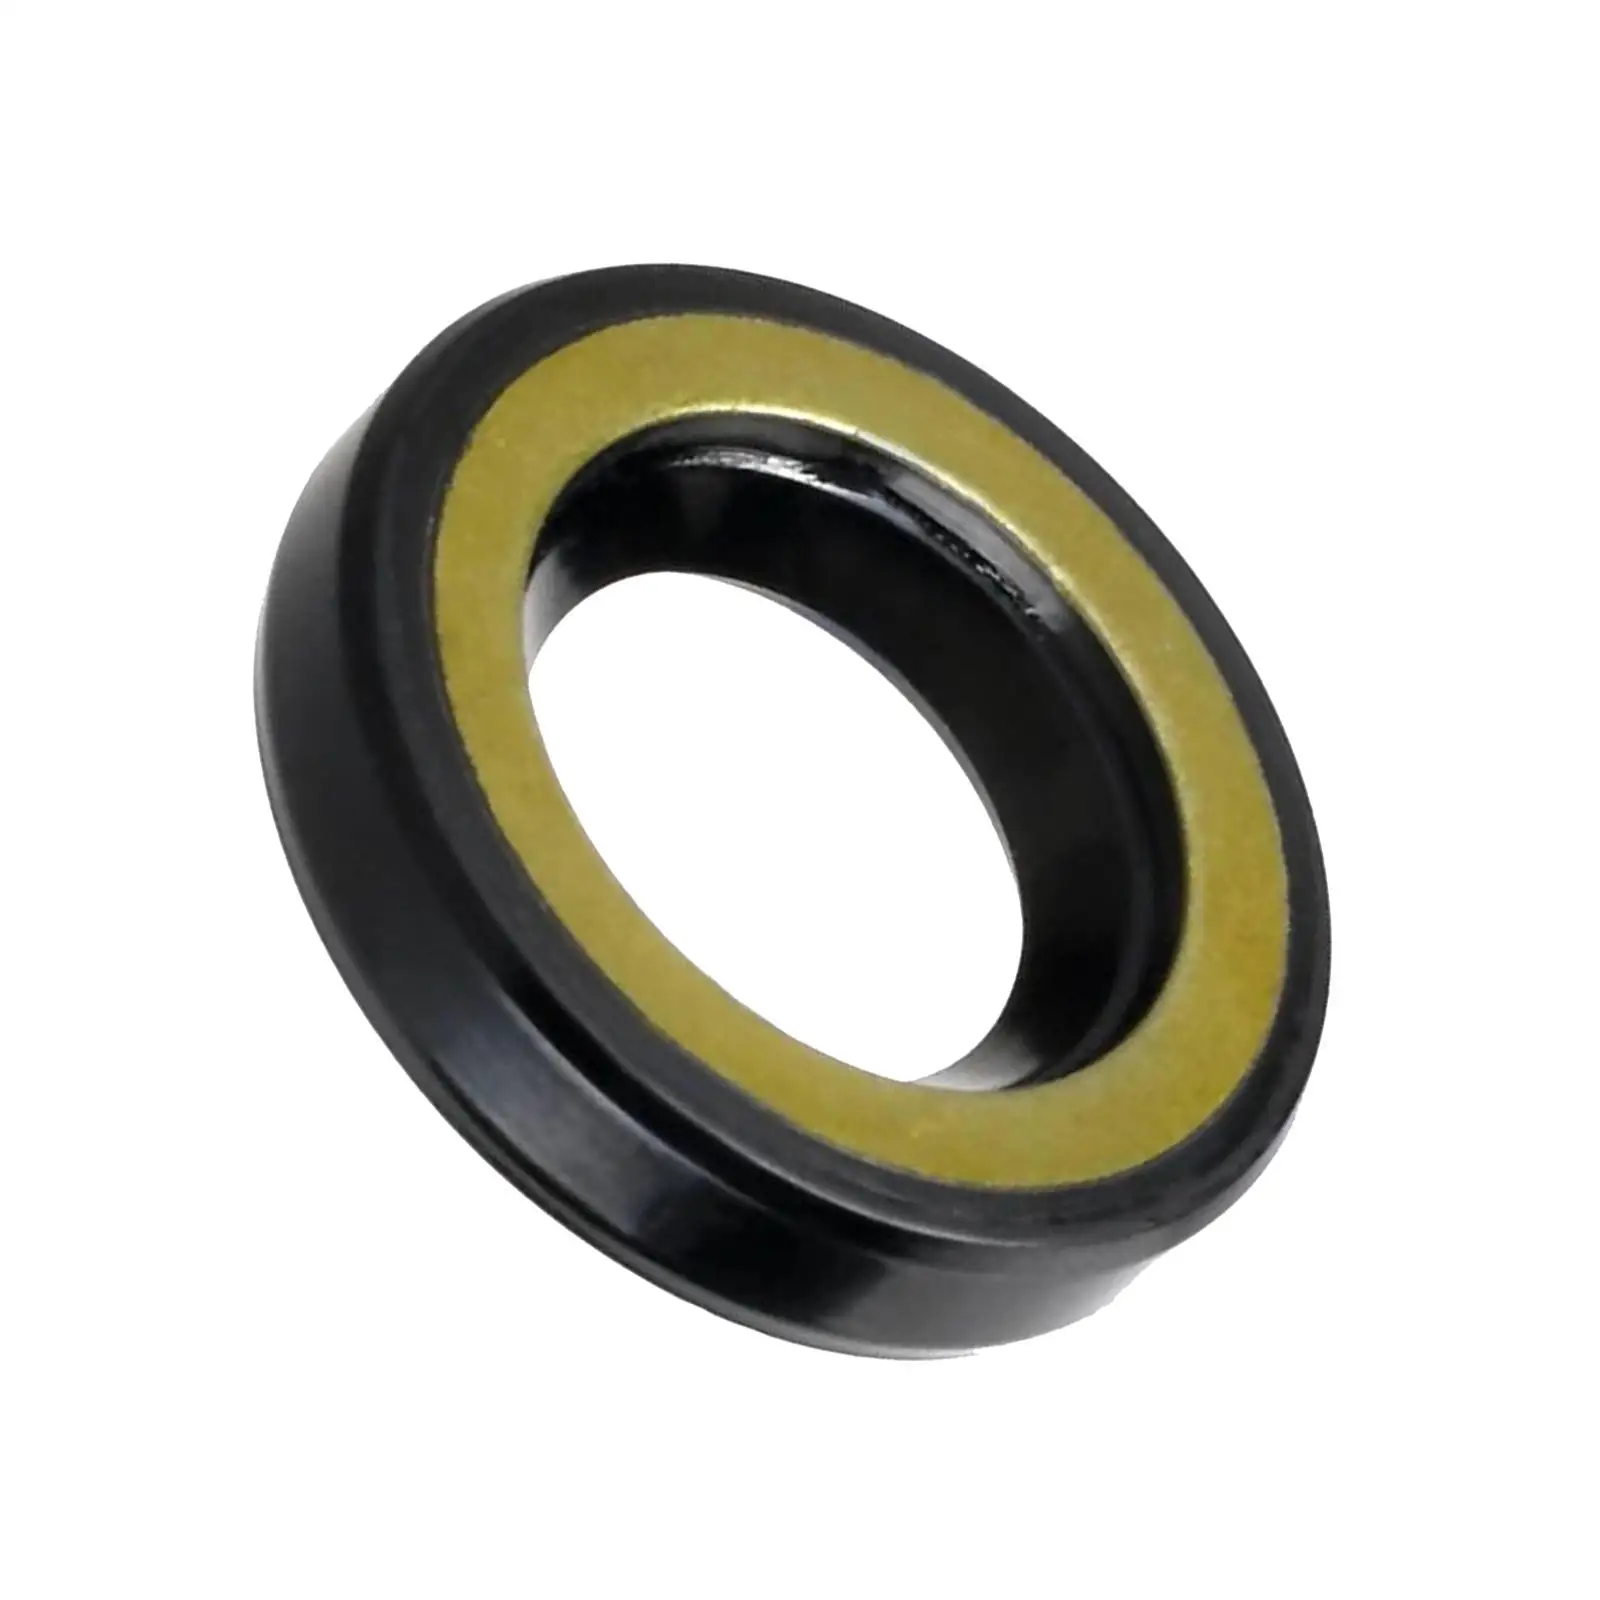 93101-20M07 Oil Seal Outboard Propeller Shaft Seal for Yamaha Outboard Engine 2T 25HP 30HP Replacement Easy to Install